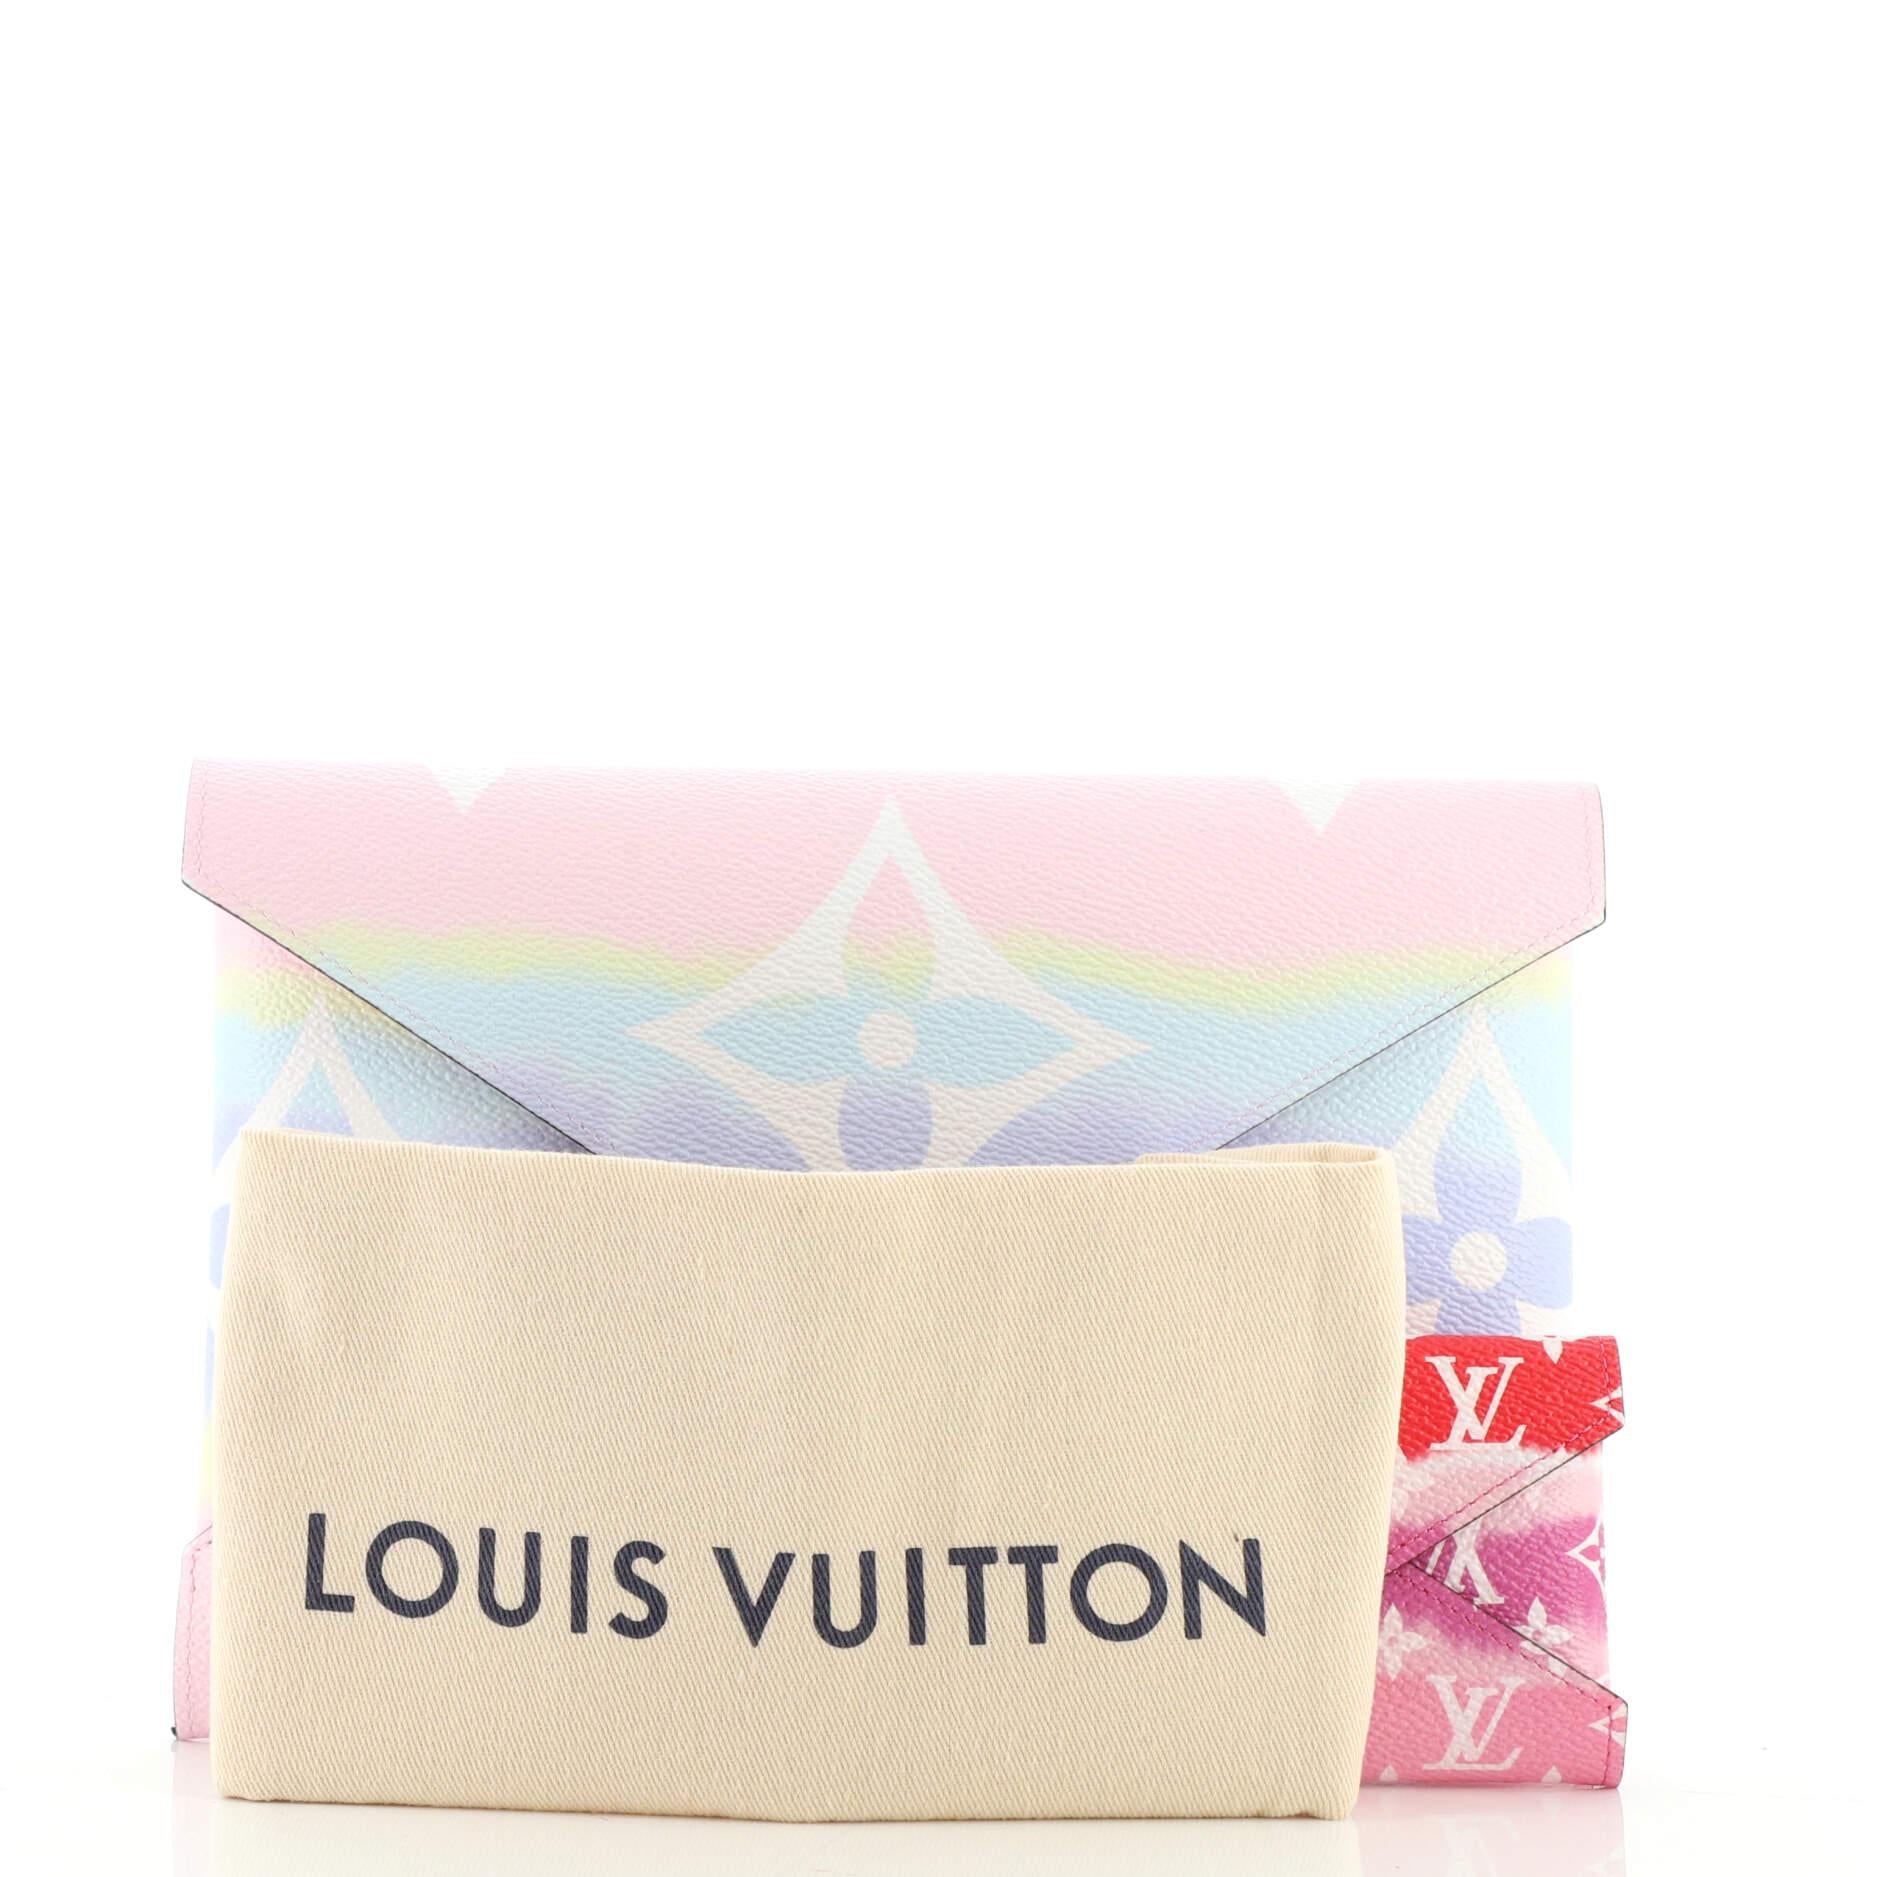 Louis Vuitton Kirigami Limited Edition - For Sale on 1stDibs | kirigami  pochette